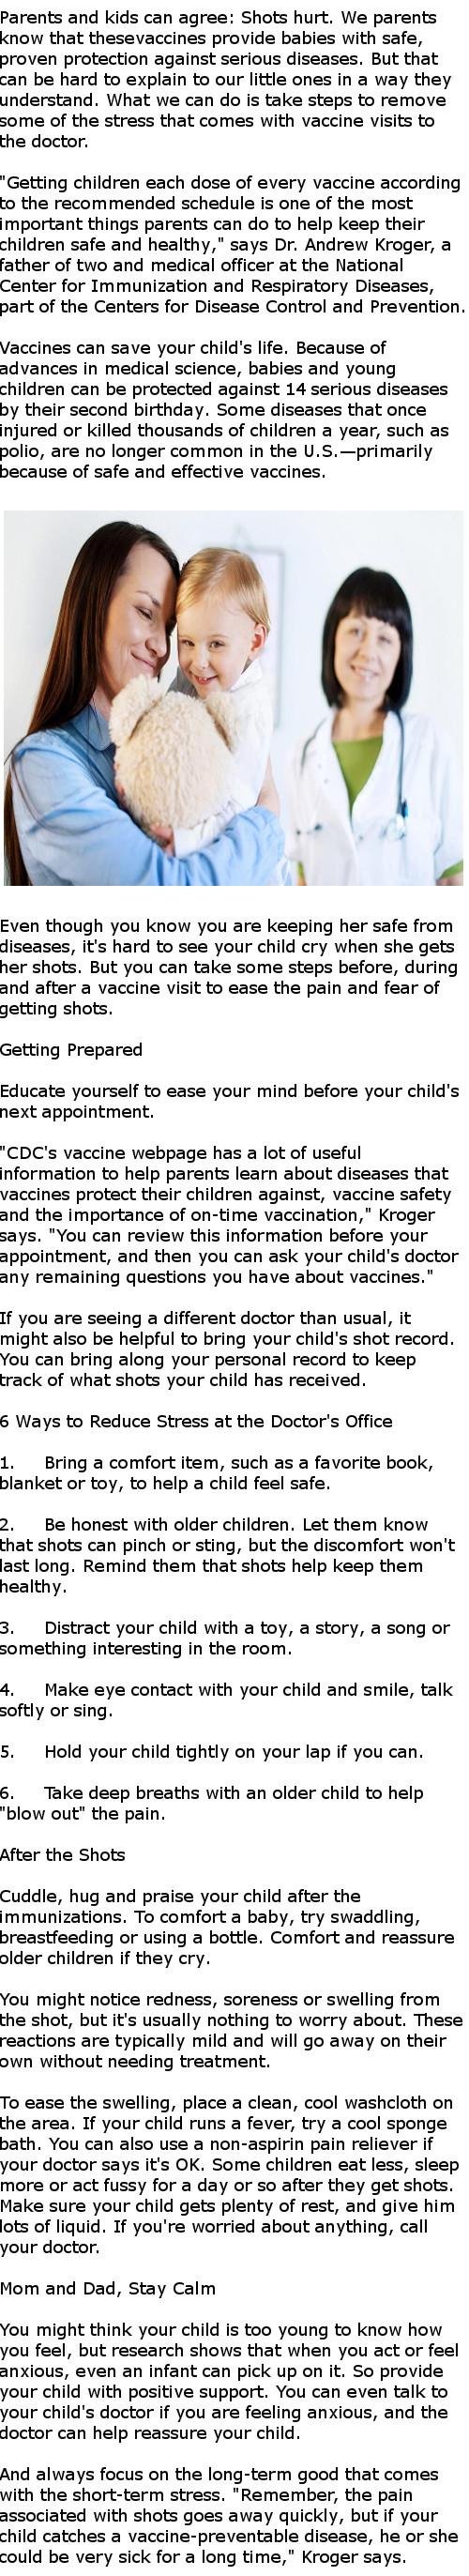 How to Make Your Child's Shots Less Stressful